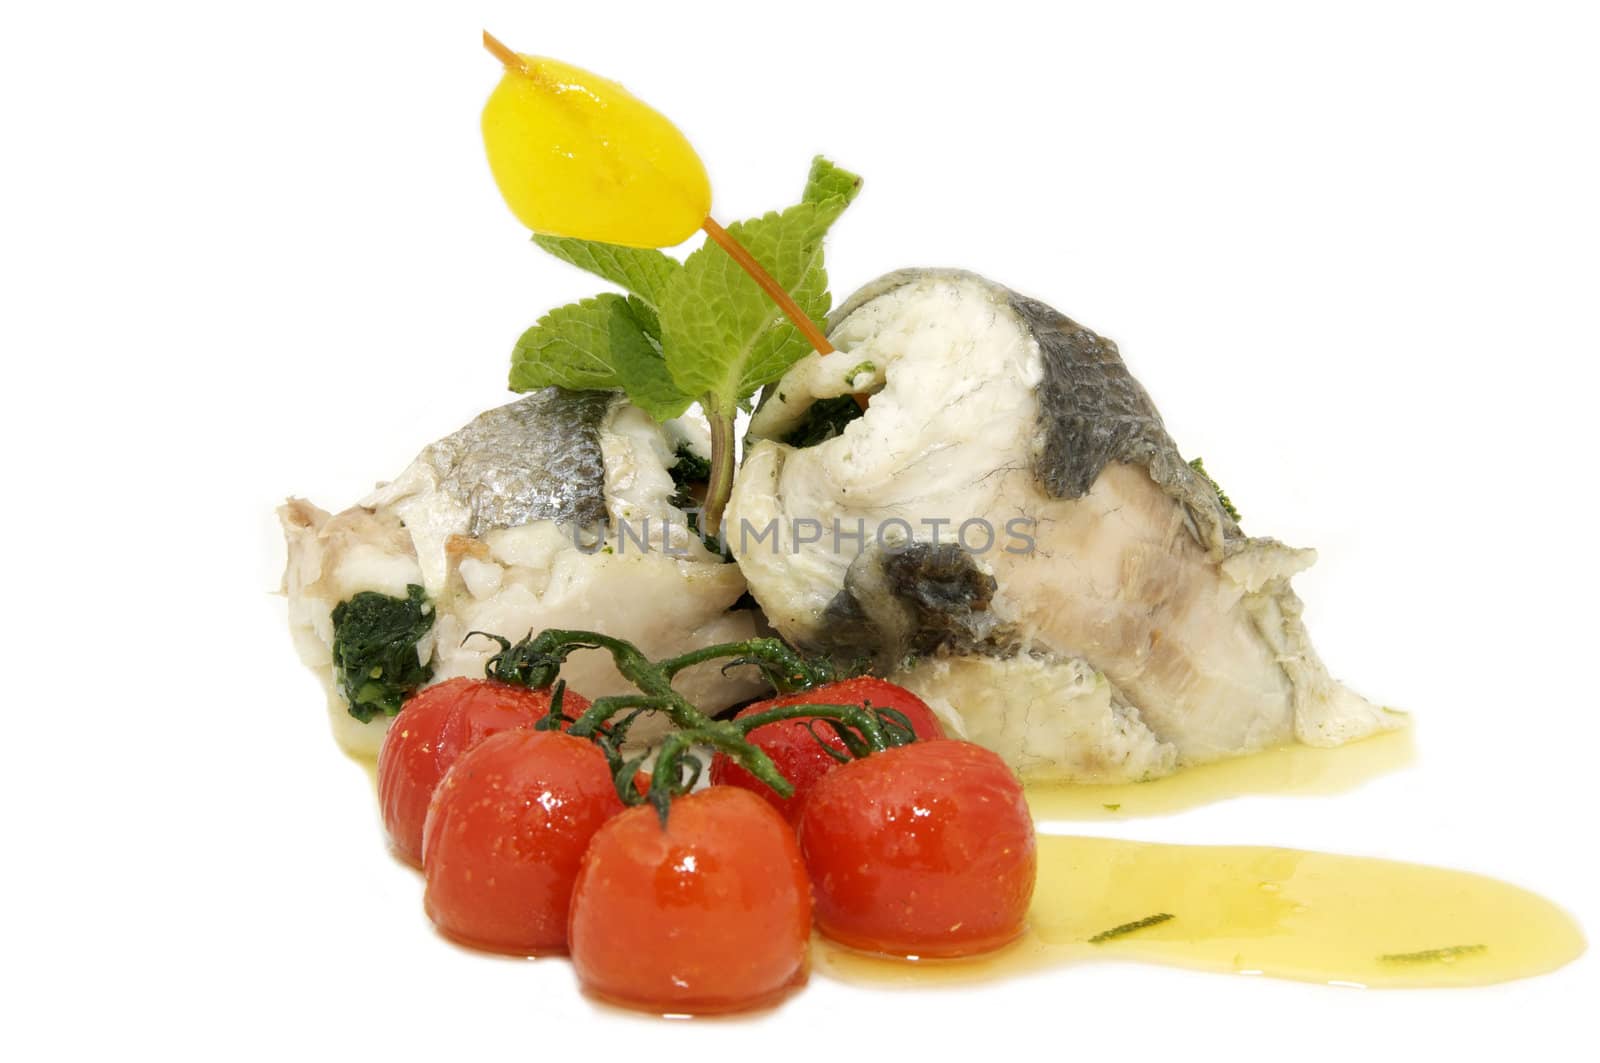 baked fish with cherry tomatoes by Lester120